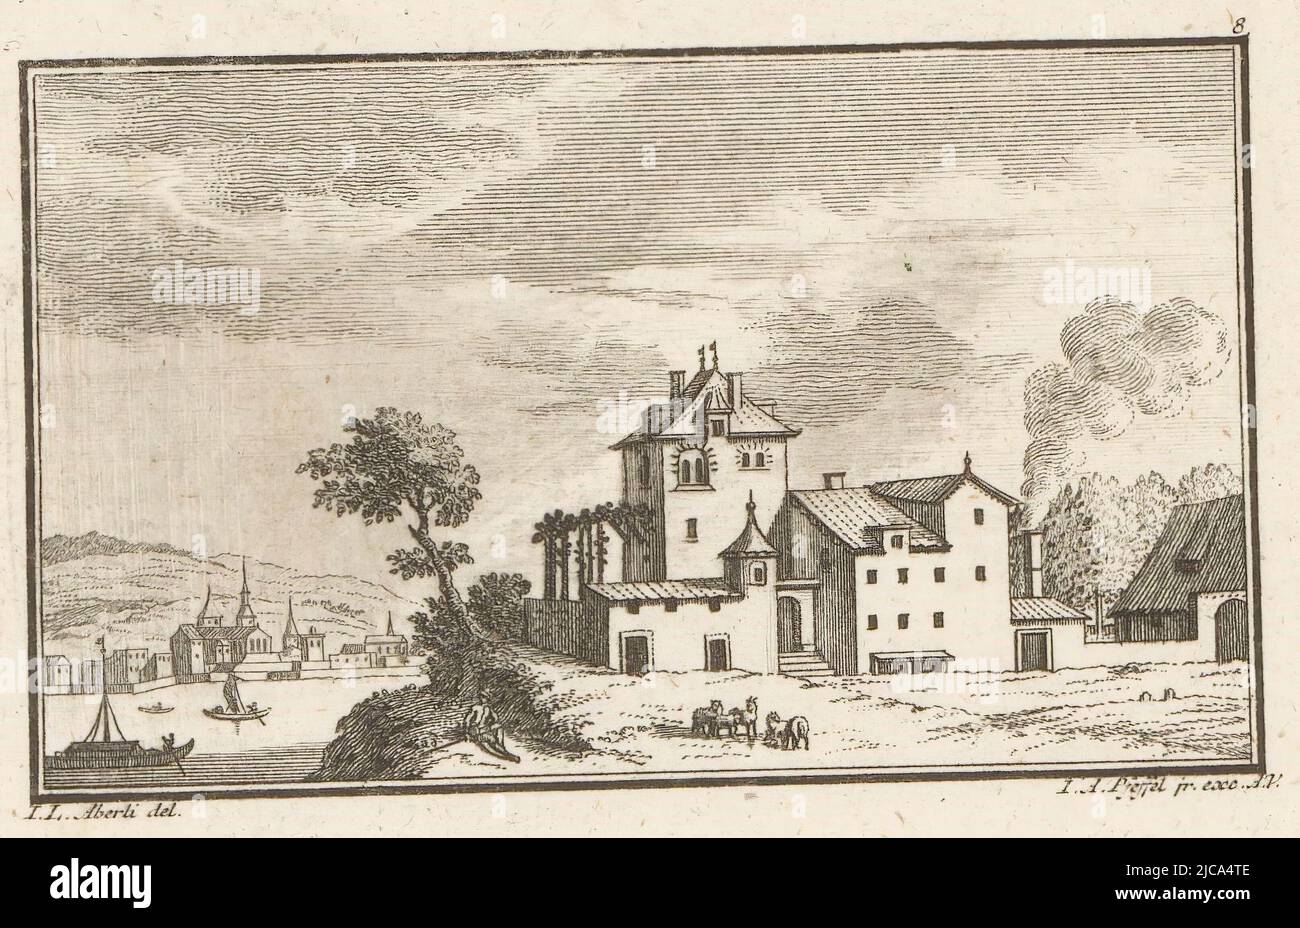 Top right printed number 8, View of a country house, print maker: Johann Andreas Pfeffel (der Jüngere), (mentioned on object), intermediary draughtsman: Johann Ludwig Aberli, (mentioned on object), 1725 - 1768, paper, etching, h 119 mm - w 155 mm Stock Photo